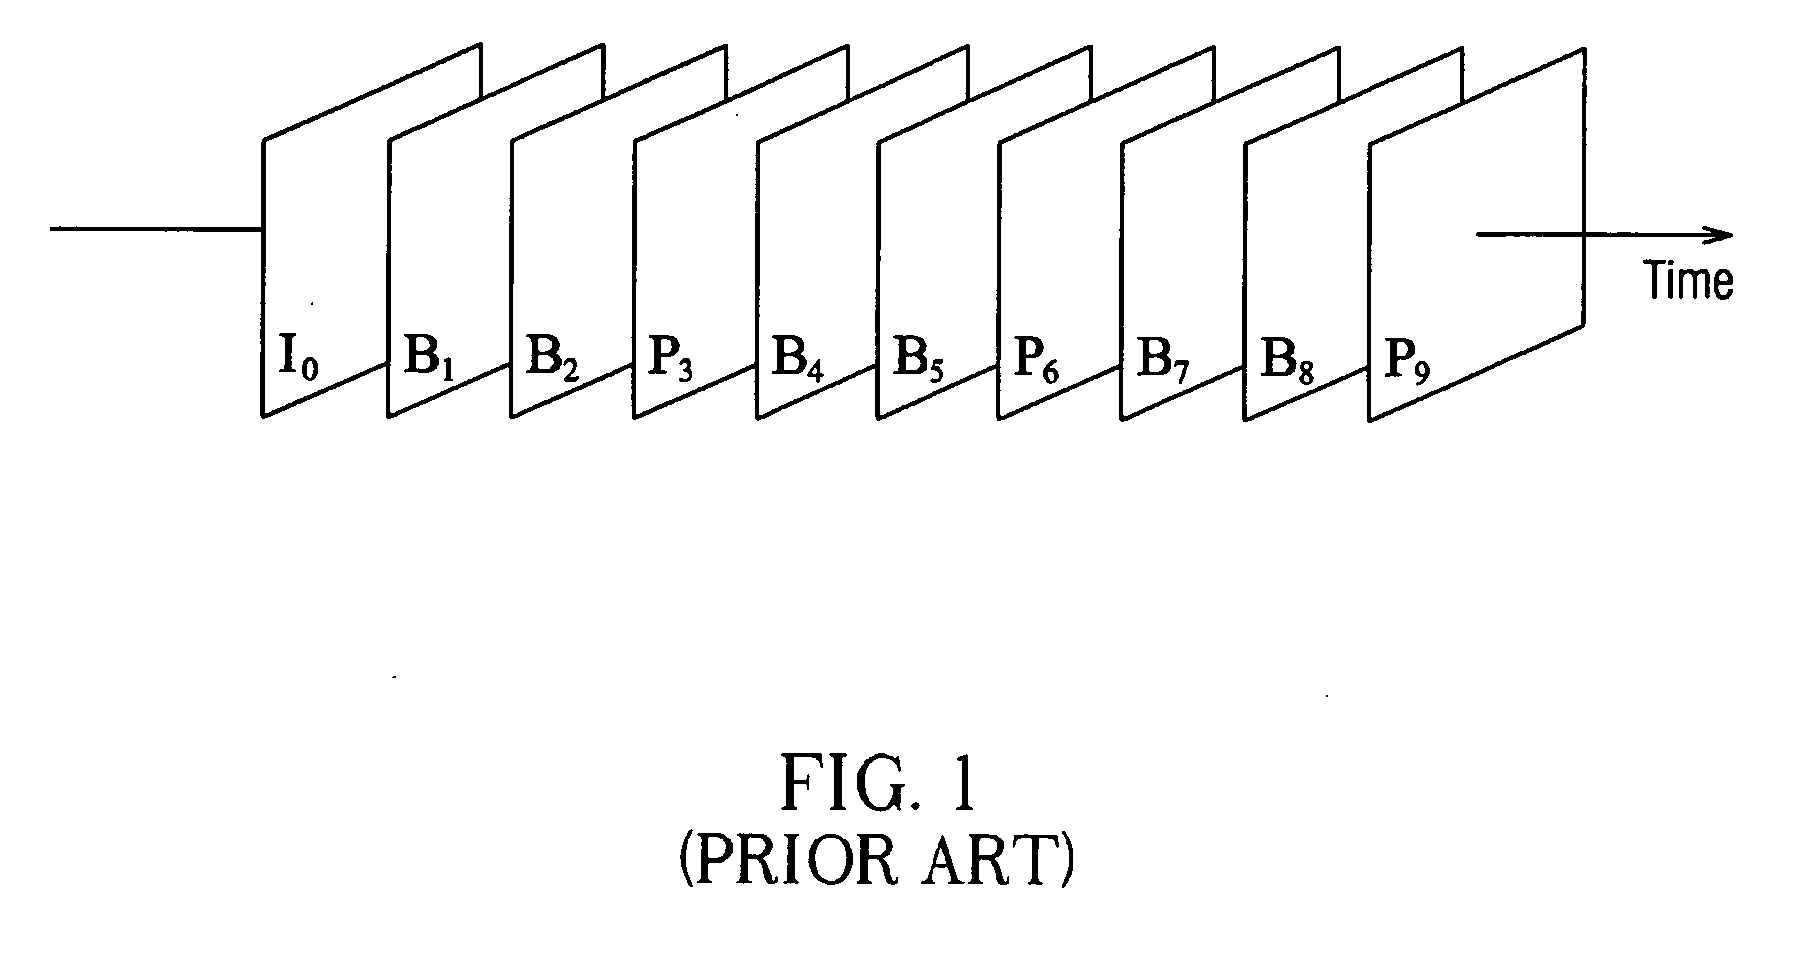 Apparatus and method for video decoding